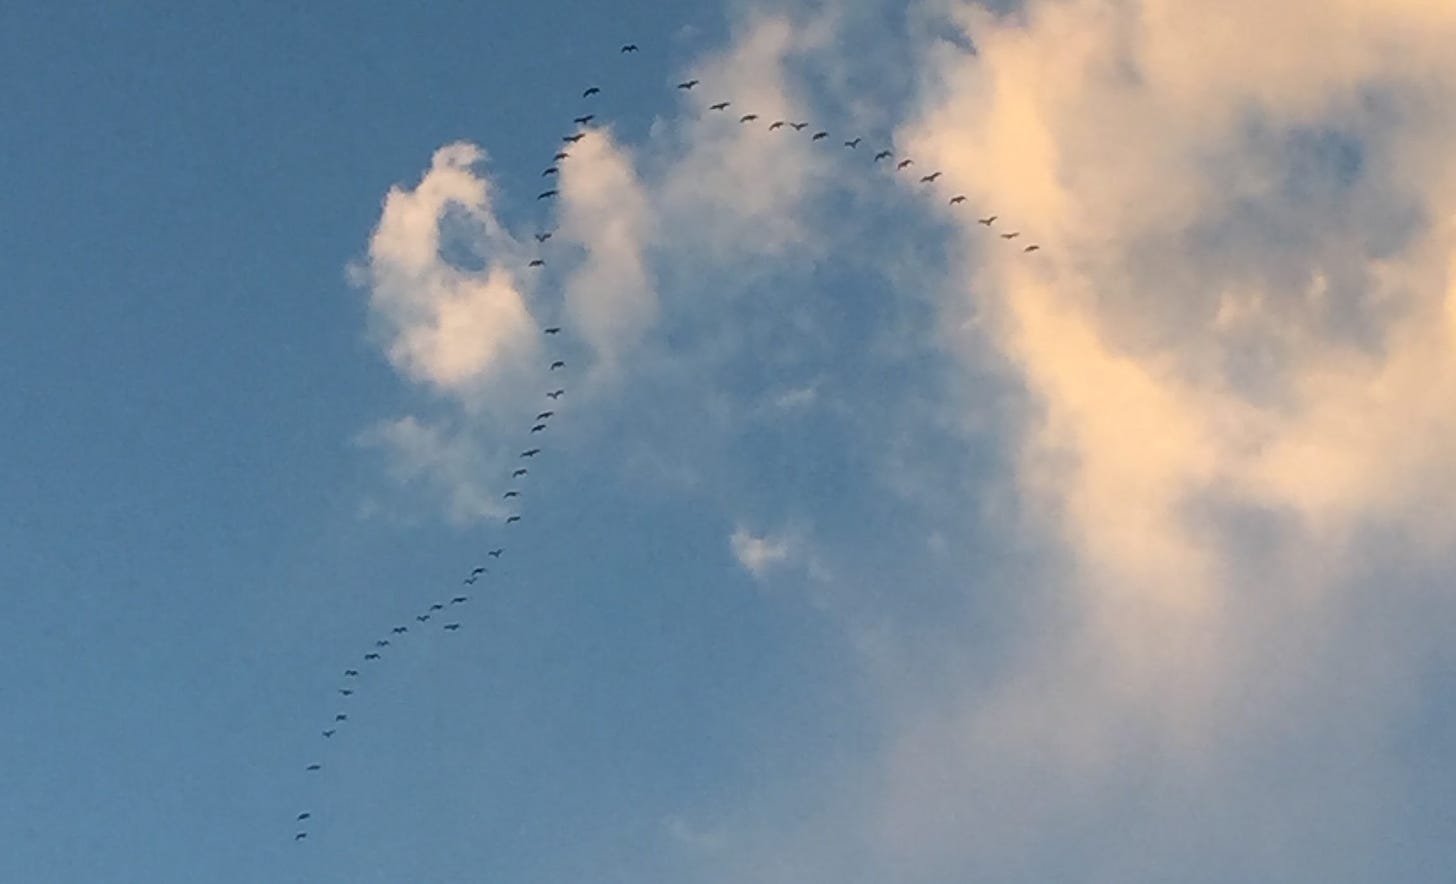 A photo of a “V” formation of birds flying across a blue sky with a smattering of sunlit clouds above them.